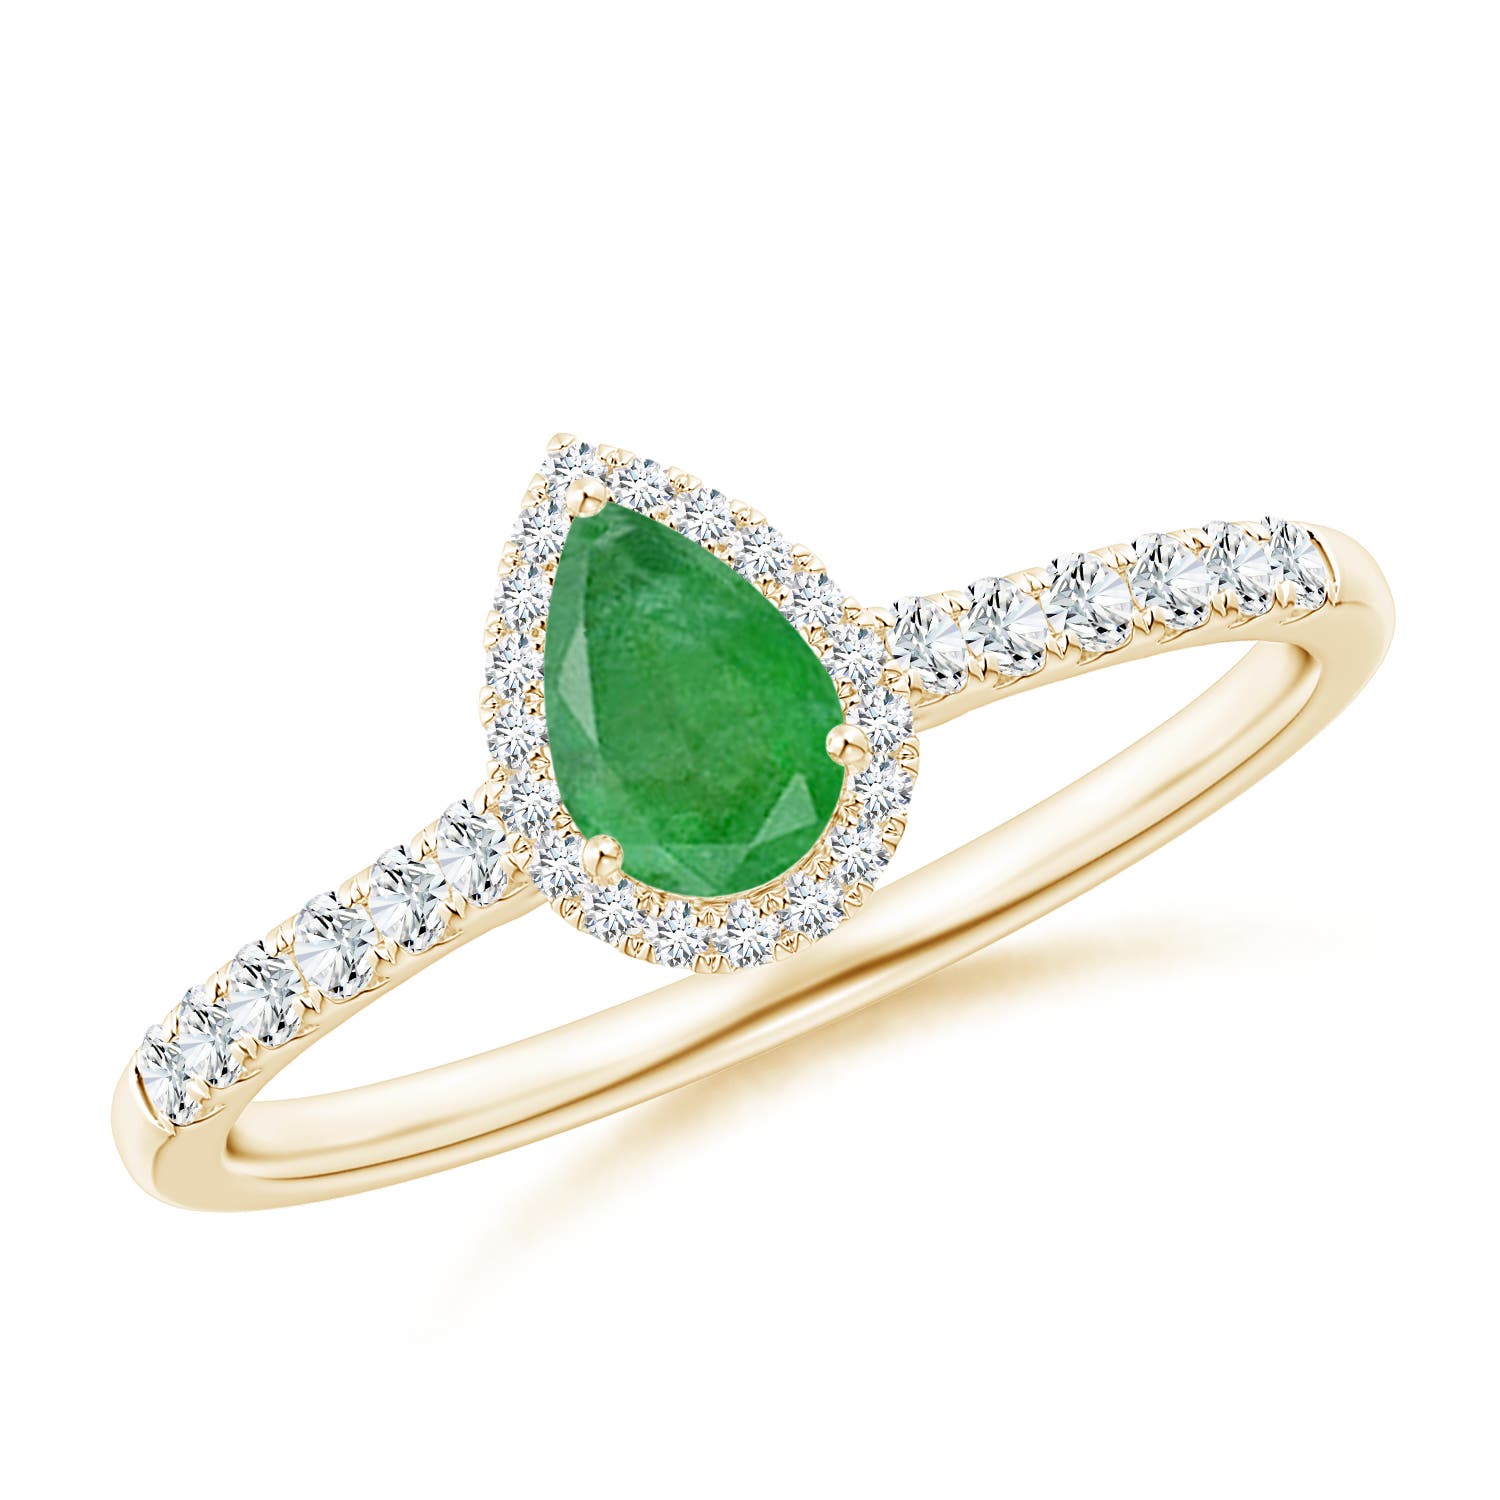 A - Emerald / 0.56 CT / 14 KT Yellow Gold